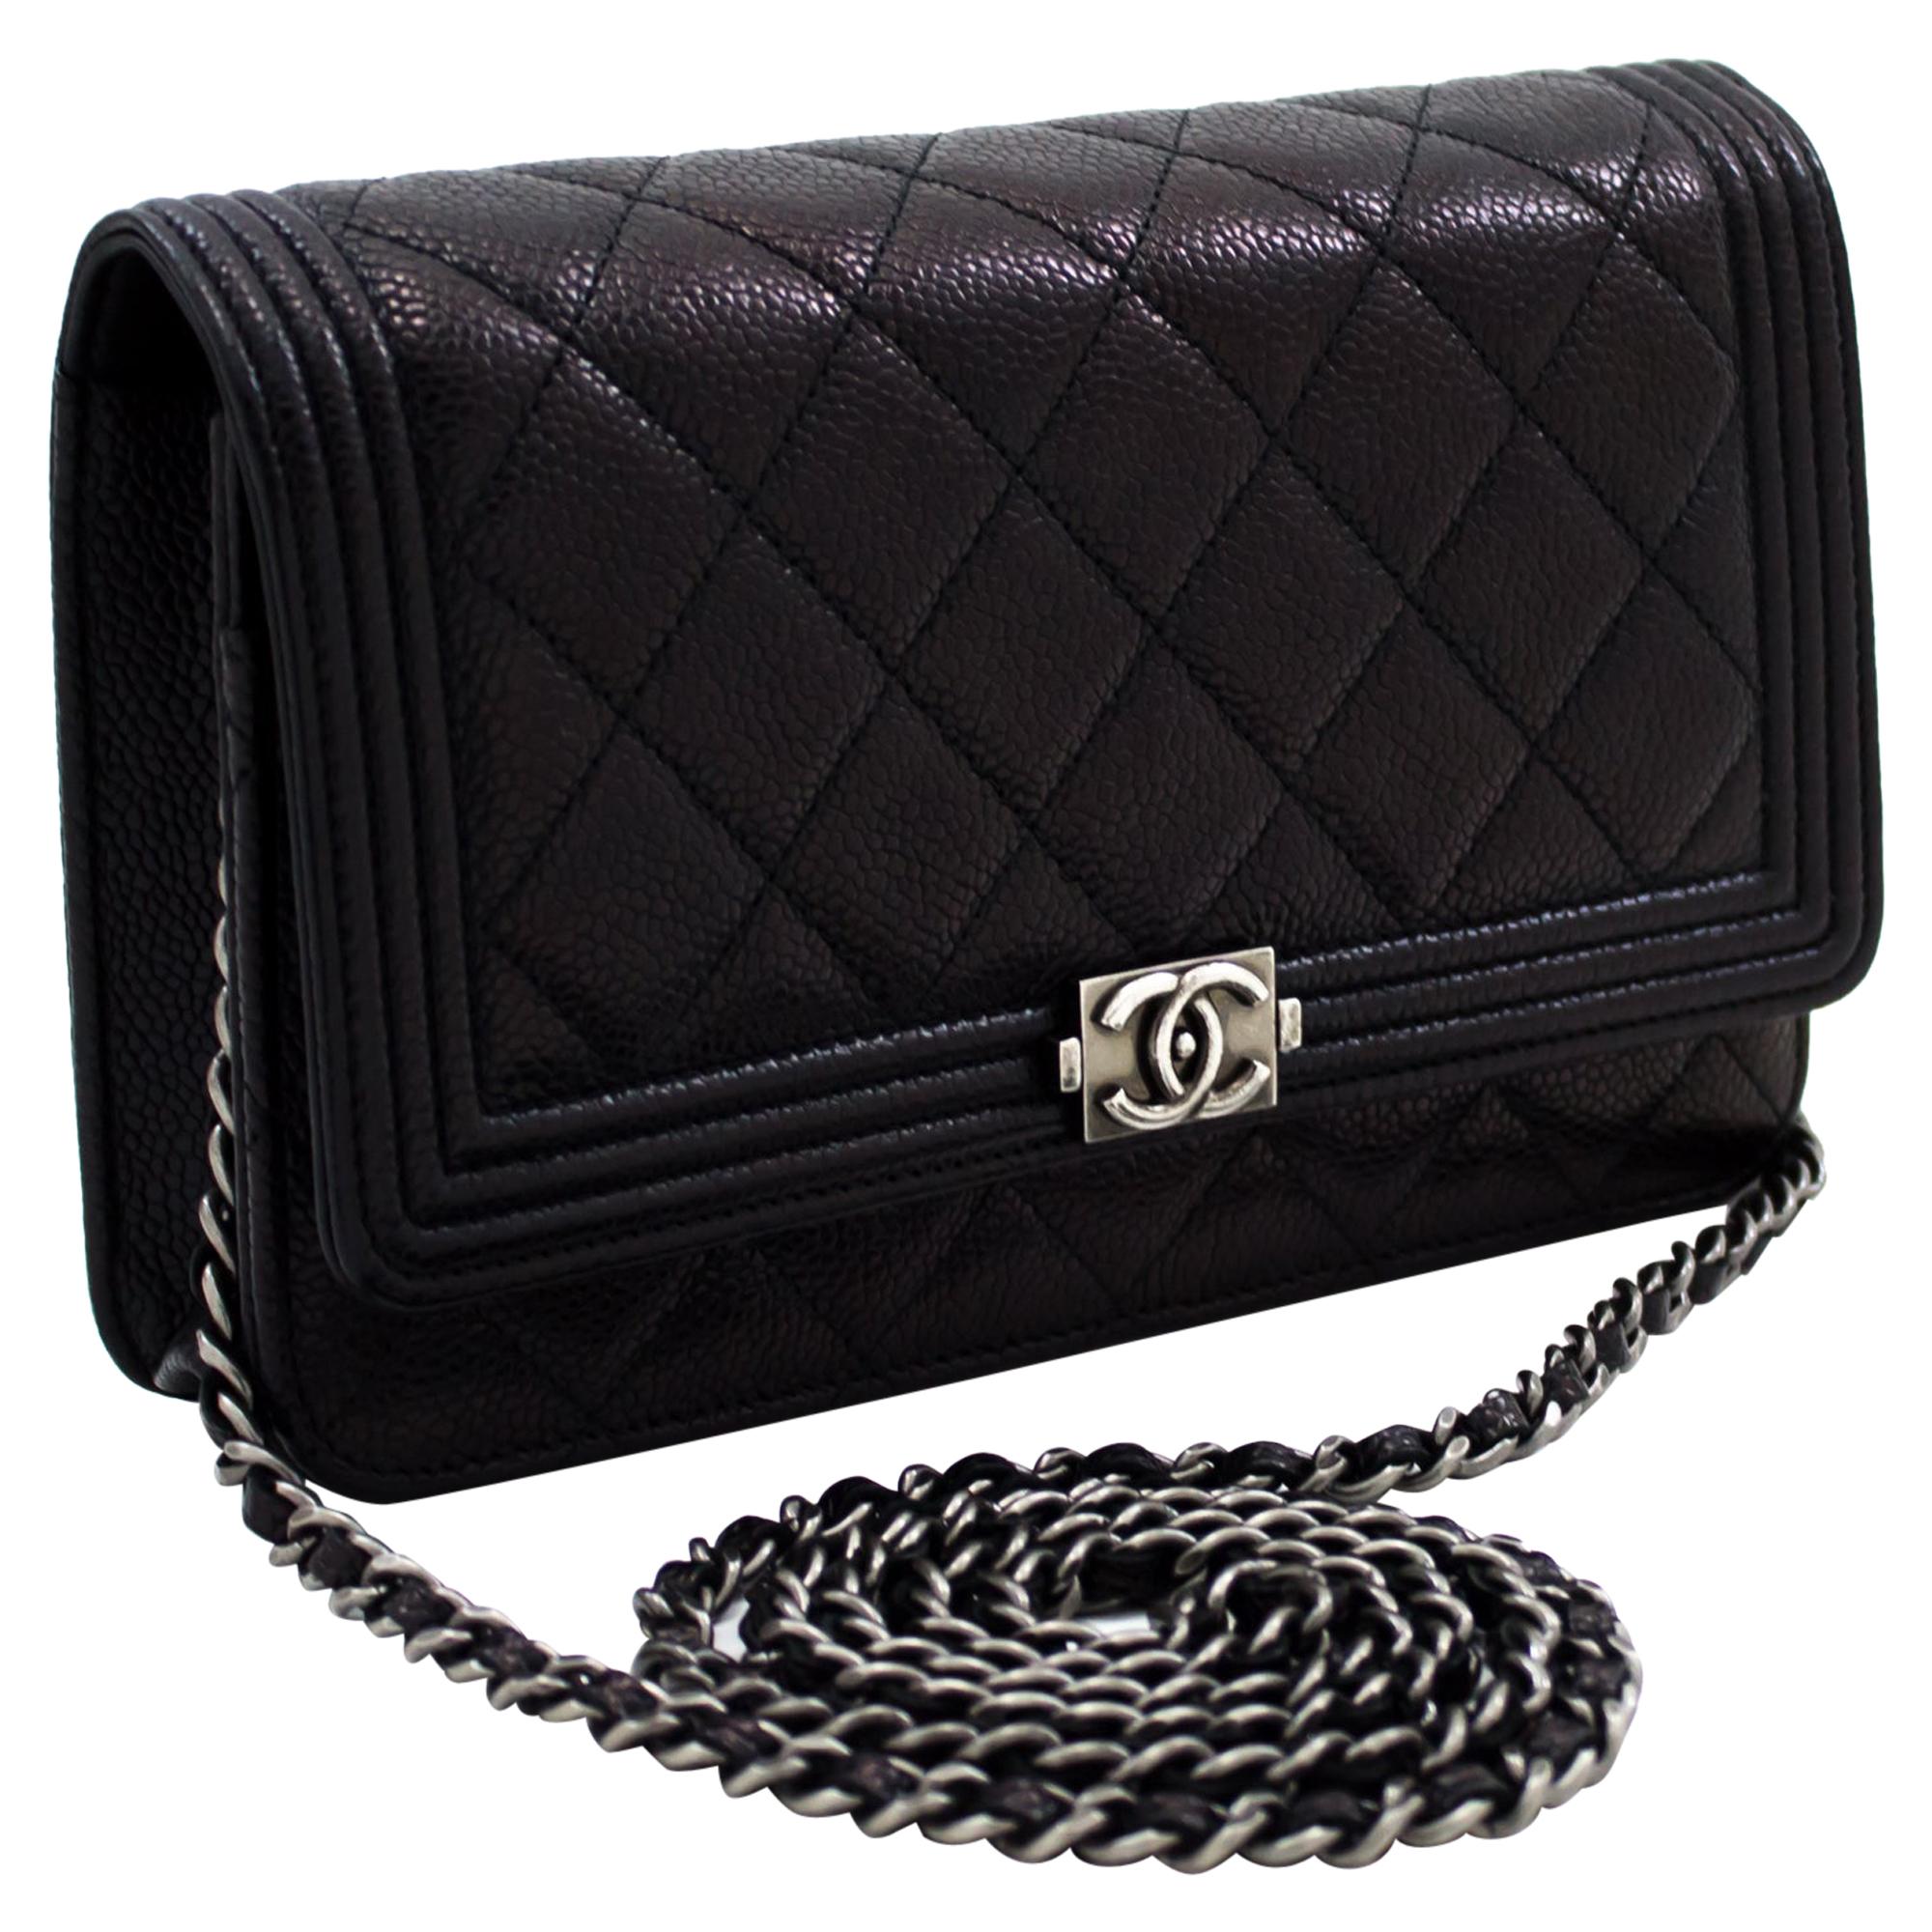 CHANEL Boy Caviar Black WOC Wallet On Chain Shoulder Bag Quilted Leather